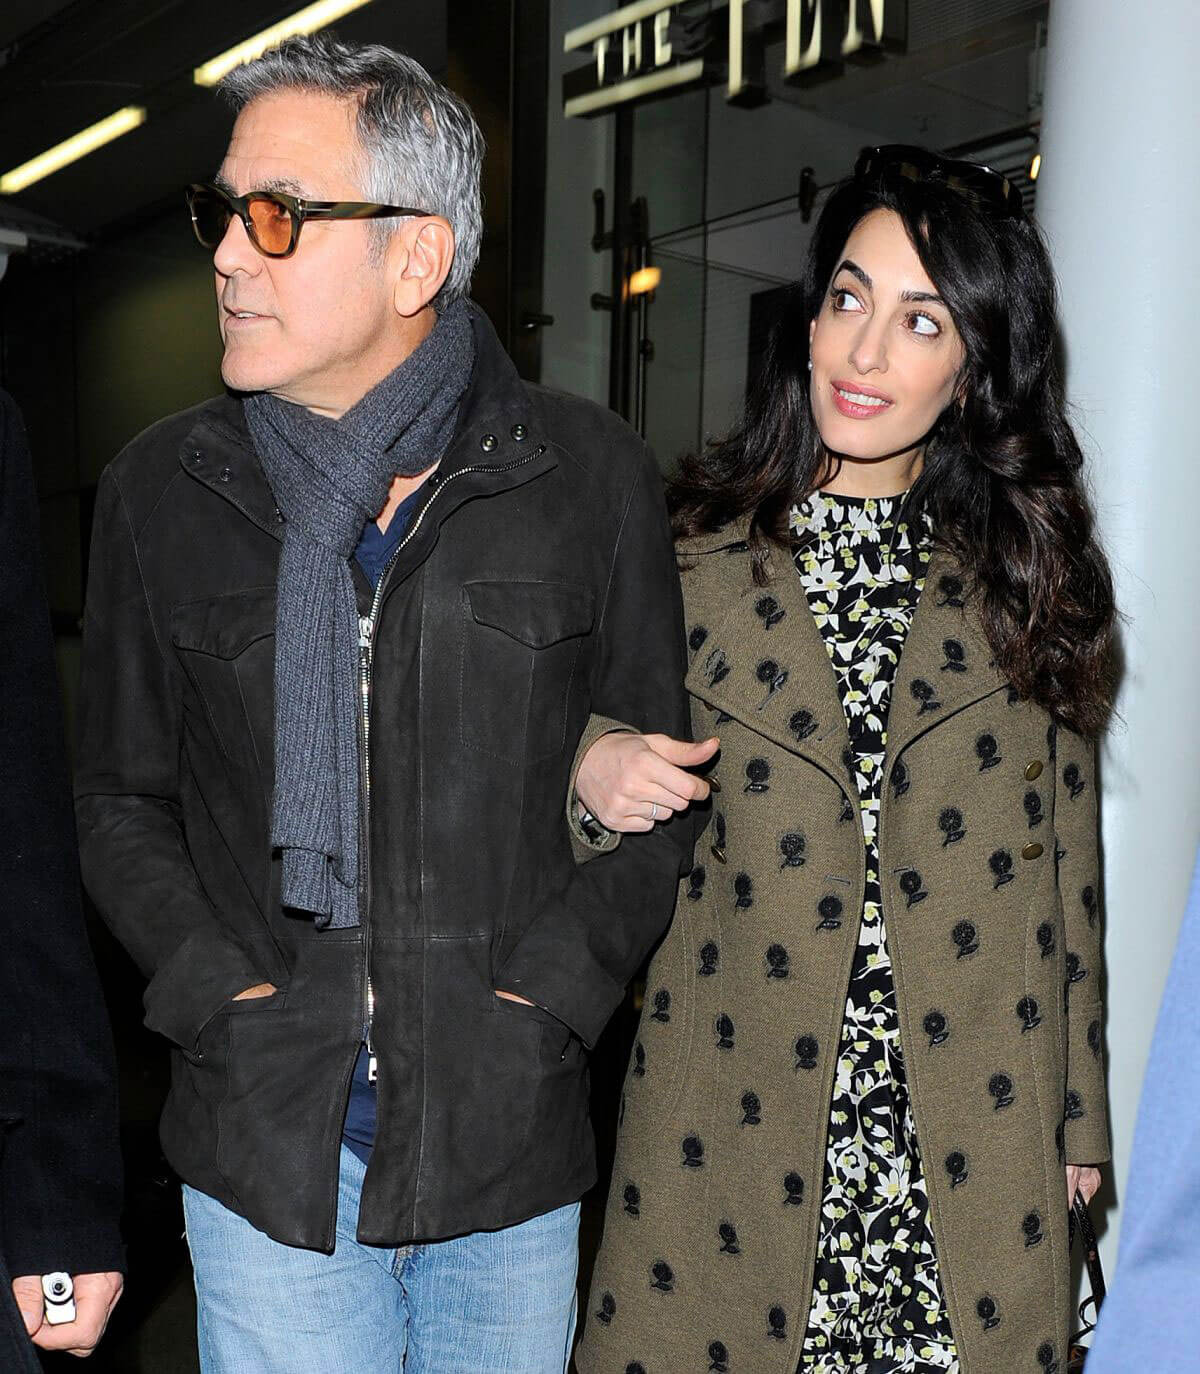 Amal Clooney and George Clooney at St Pancras Eurostar in London 1